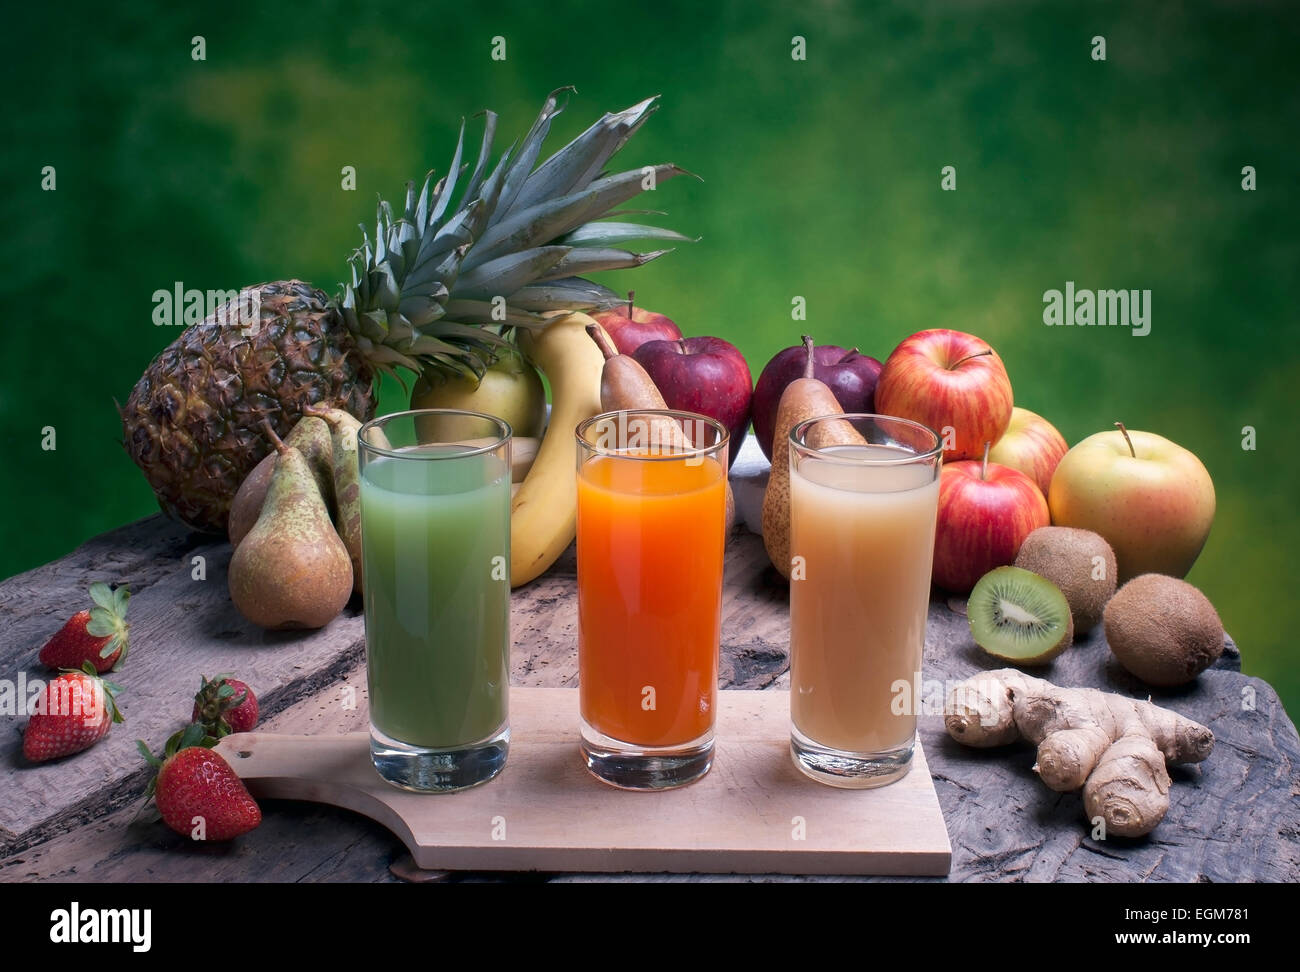 mixed fruit on a wooden board ready for juices and juice Stock Photo